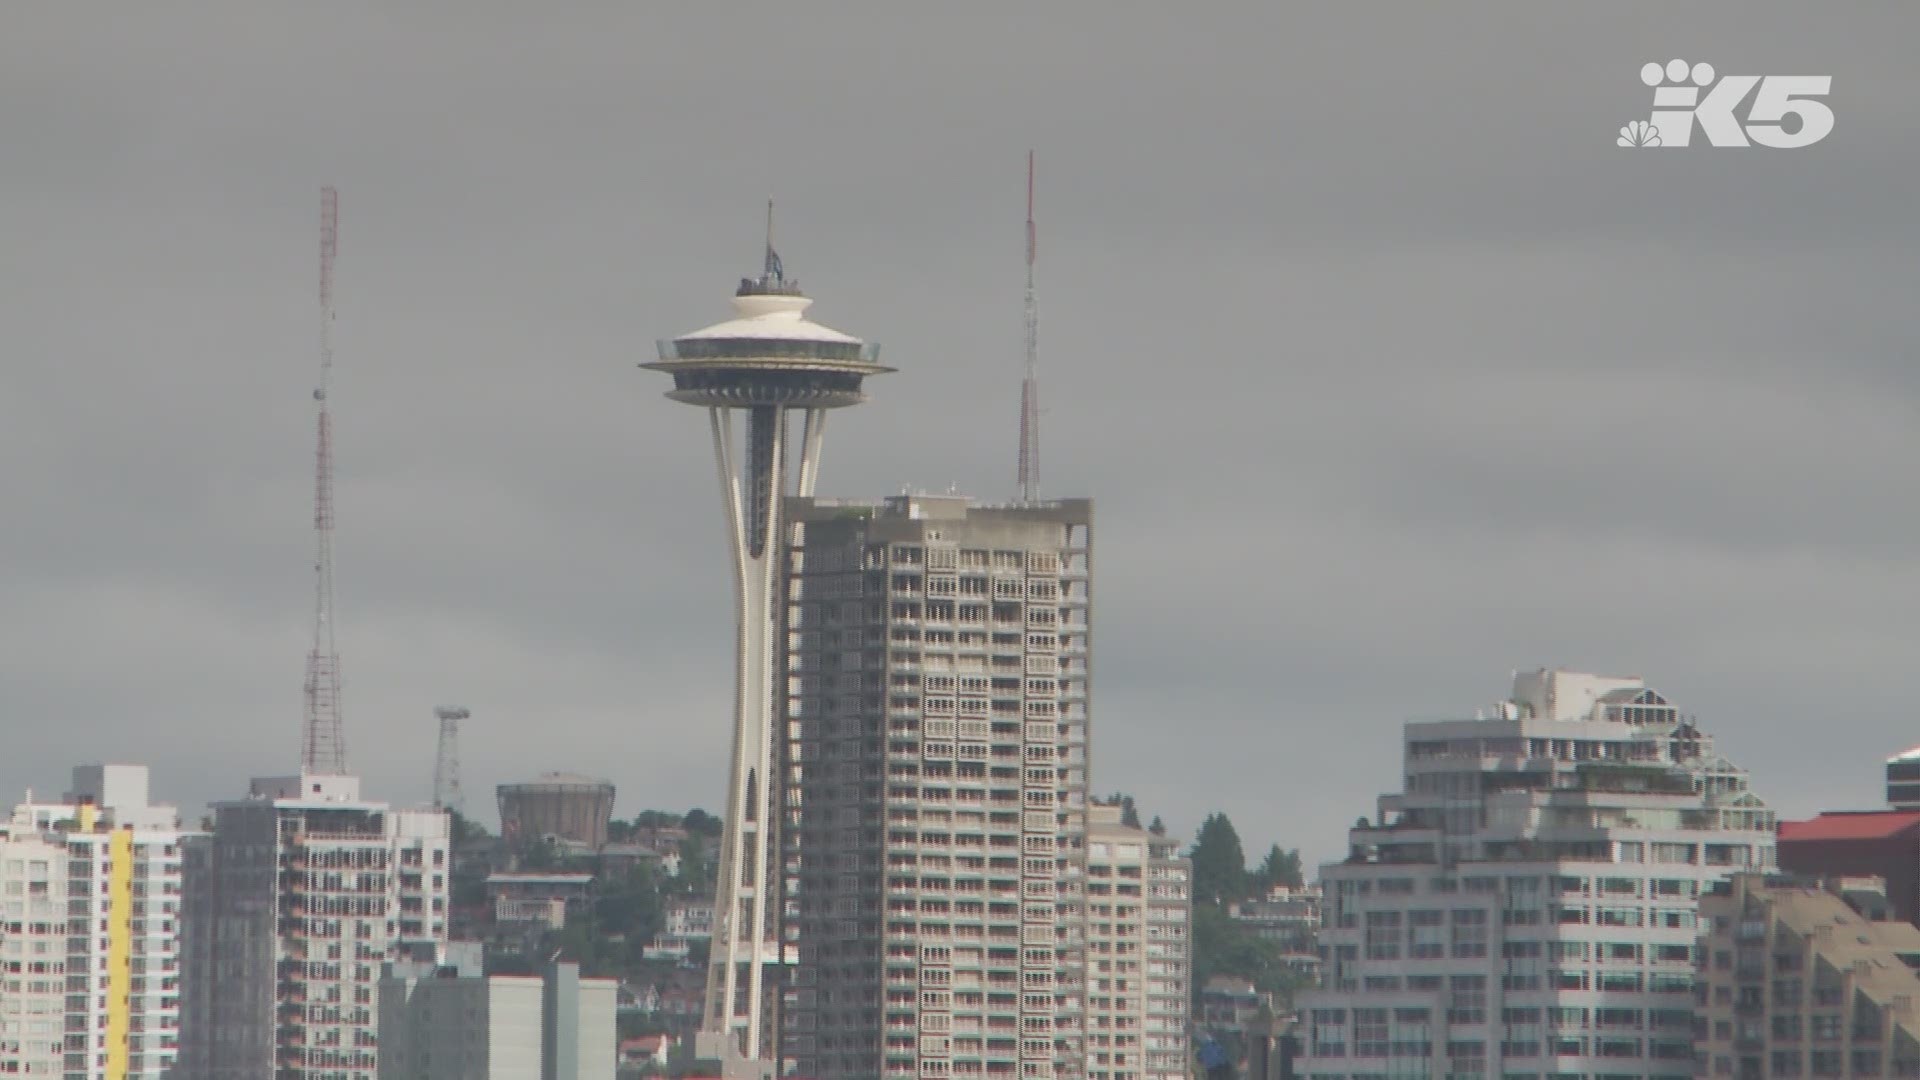 Representatives from the Seattle Kraken NHL franchise raised their logo flag above the Space Needle following the team name announcement Thursday.